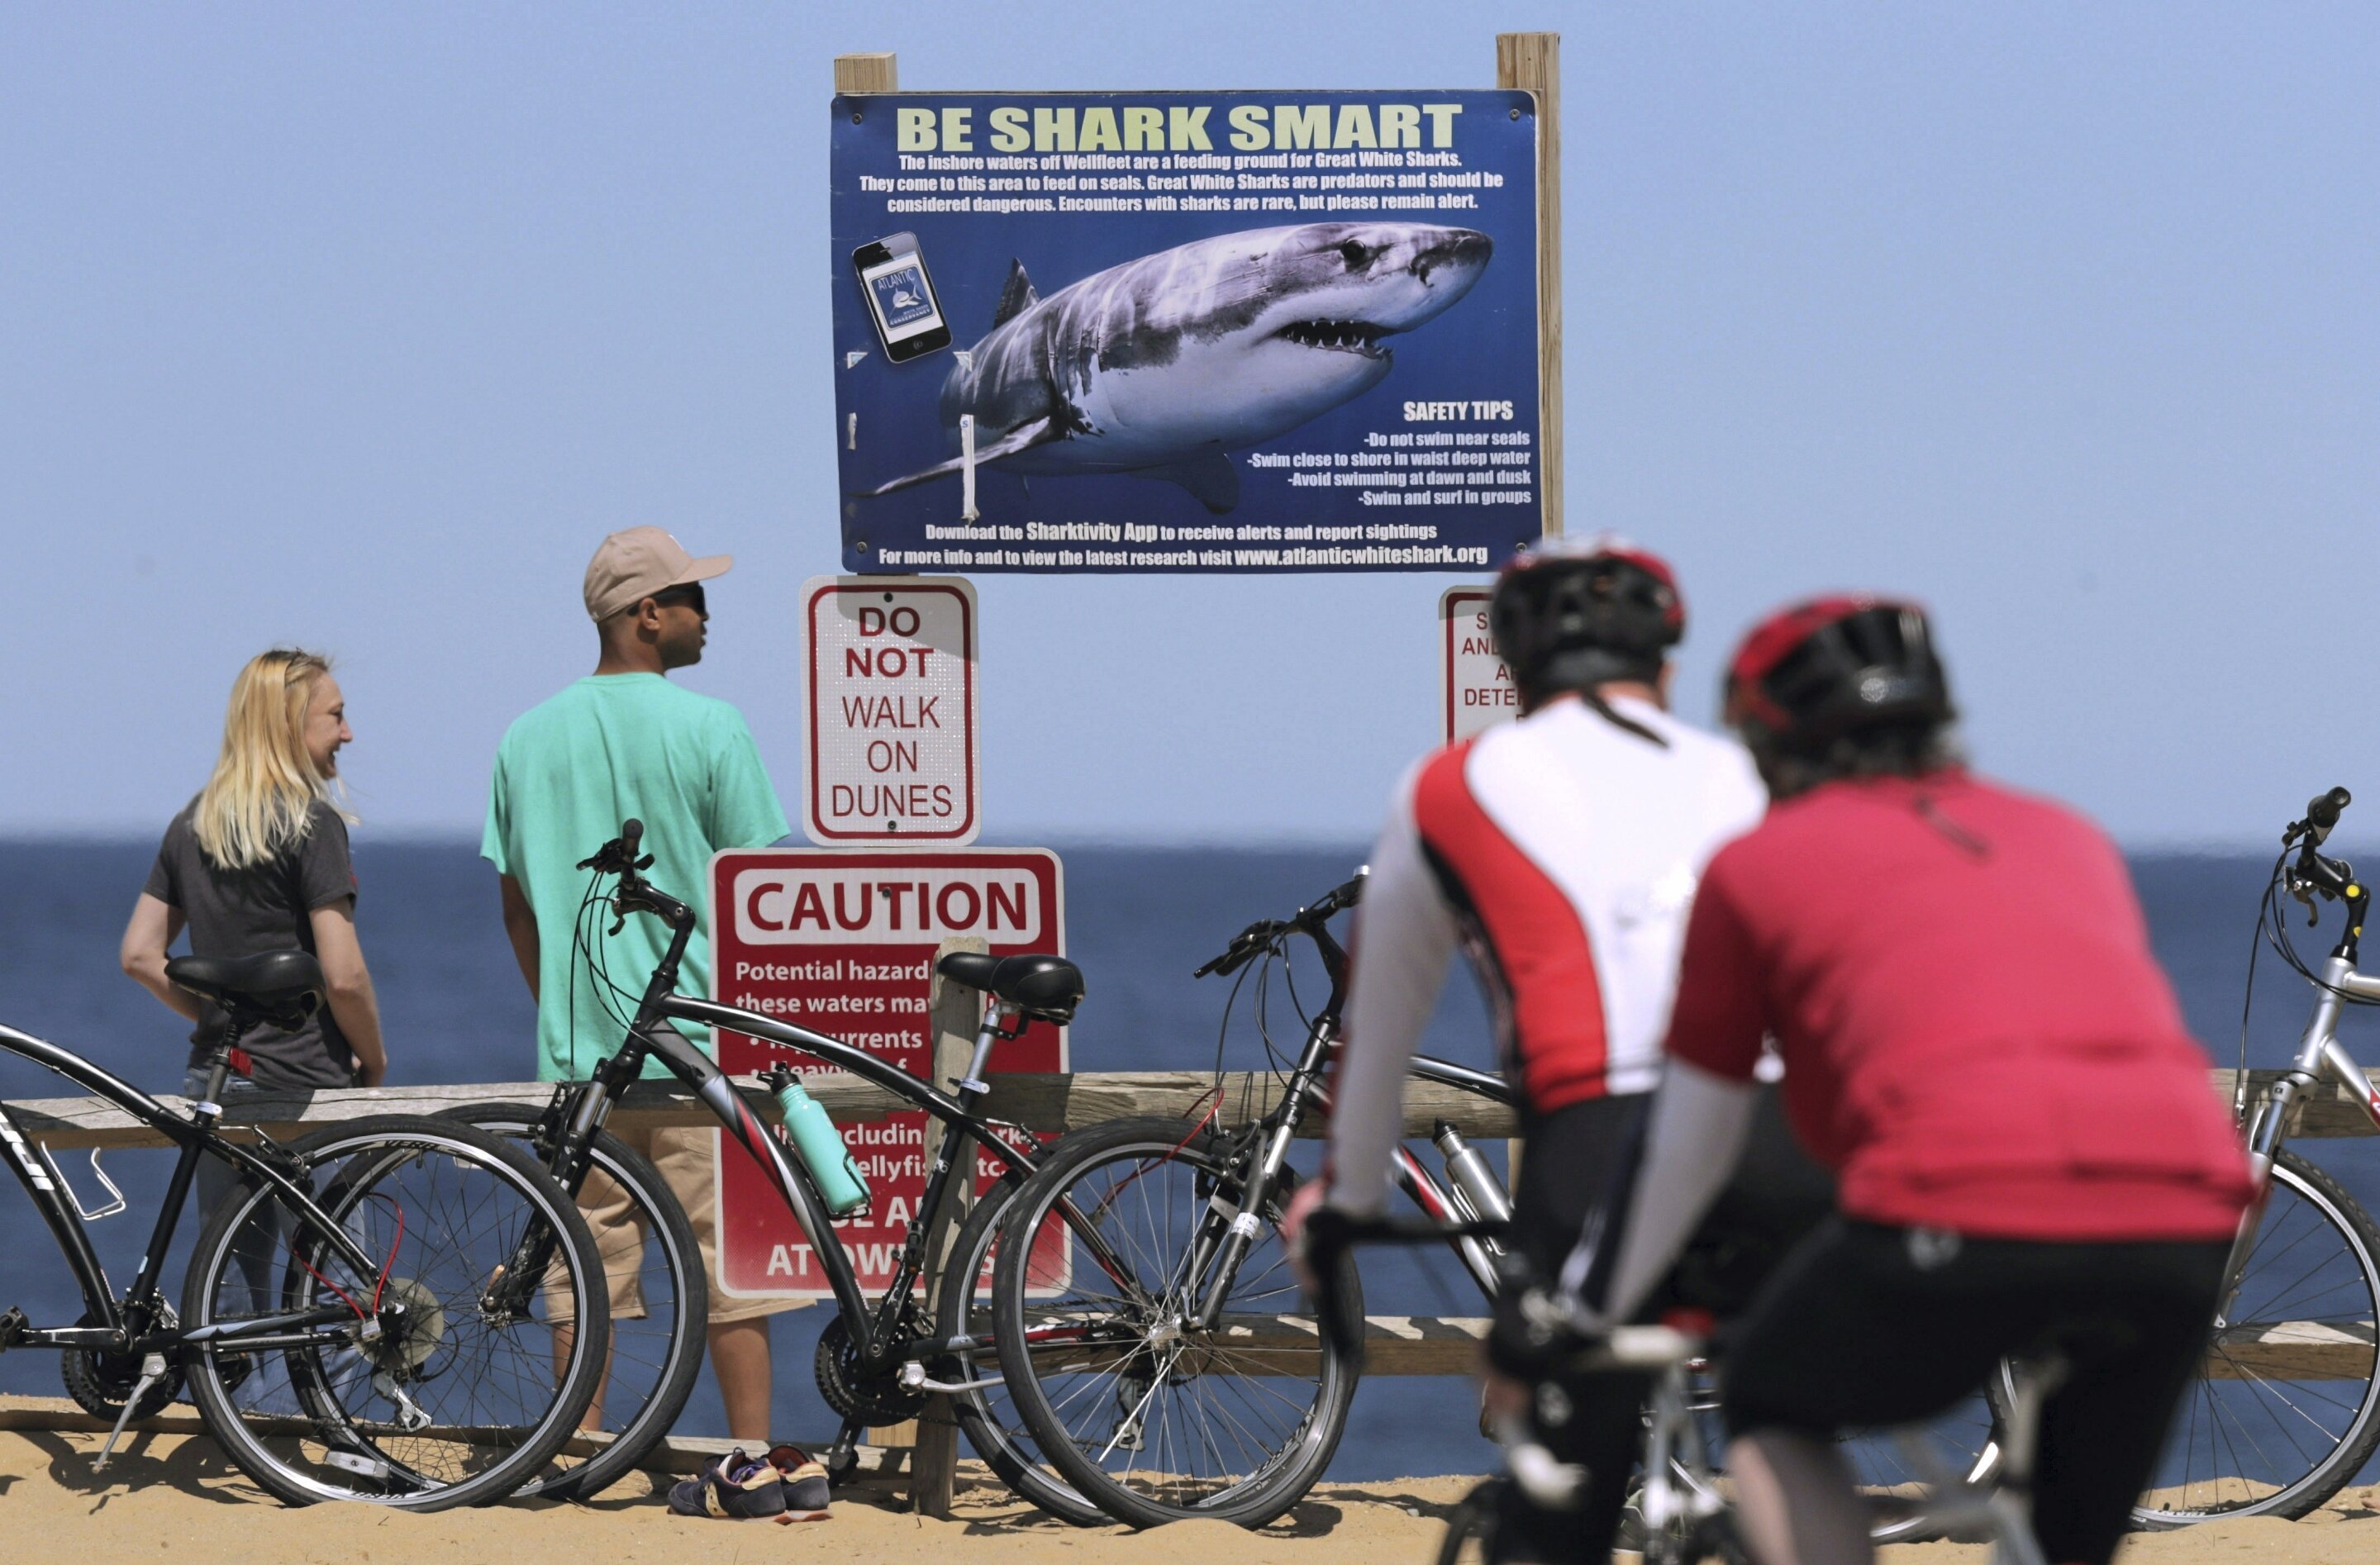 Upgraded Sensors Used by Scientists for Tracking White Sharks in Cape Cod